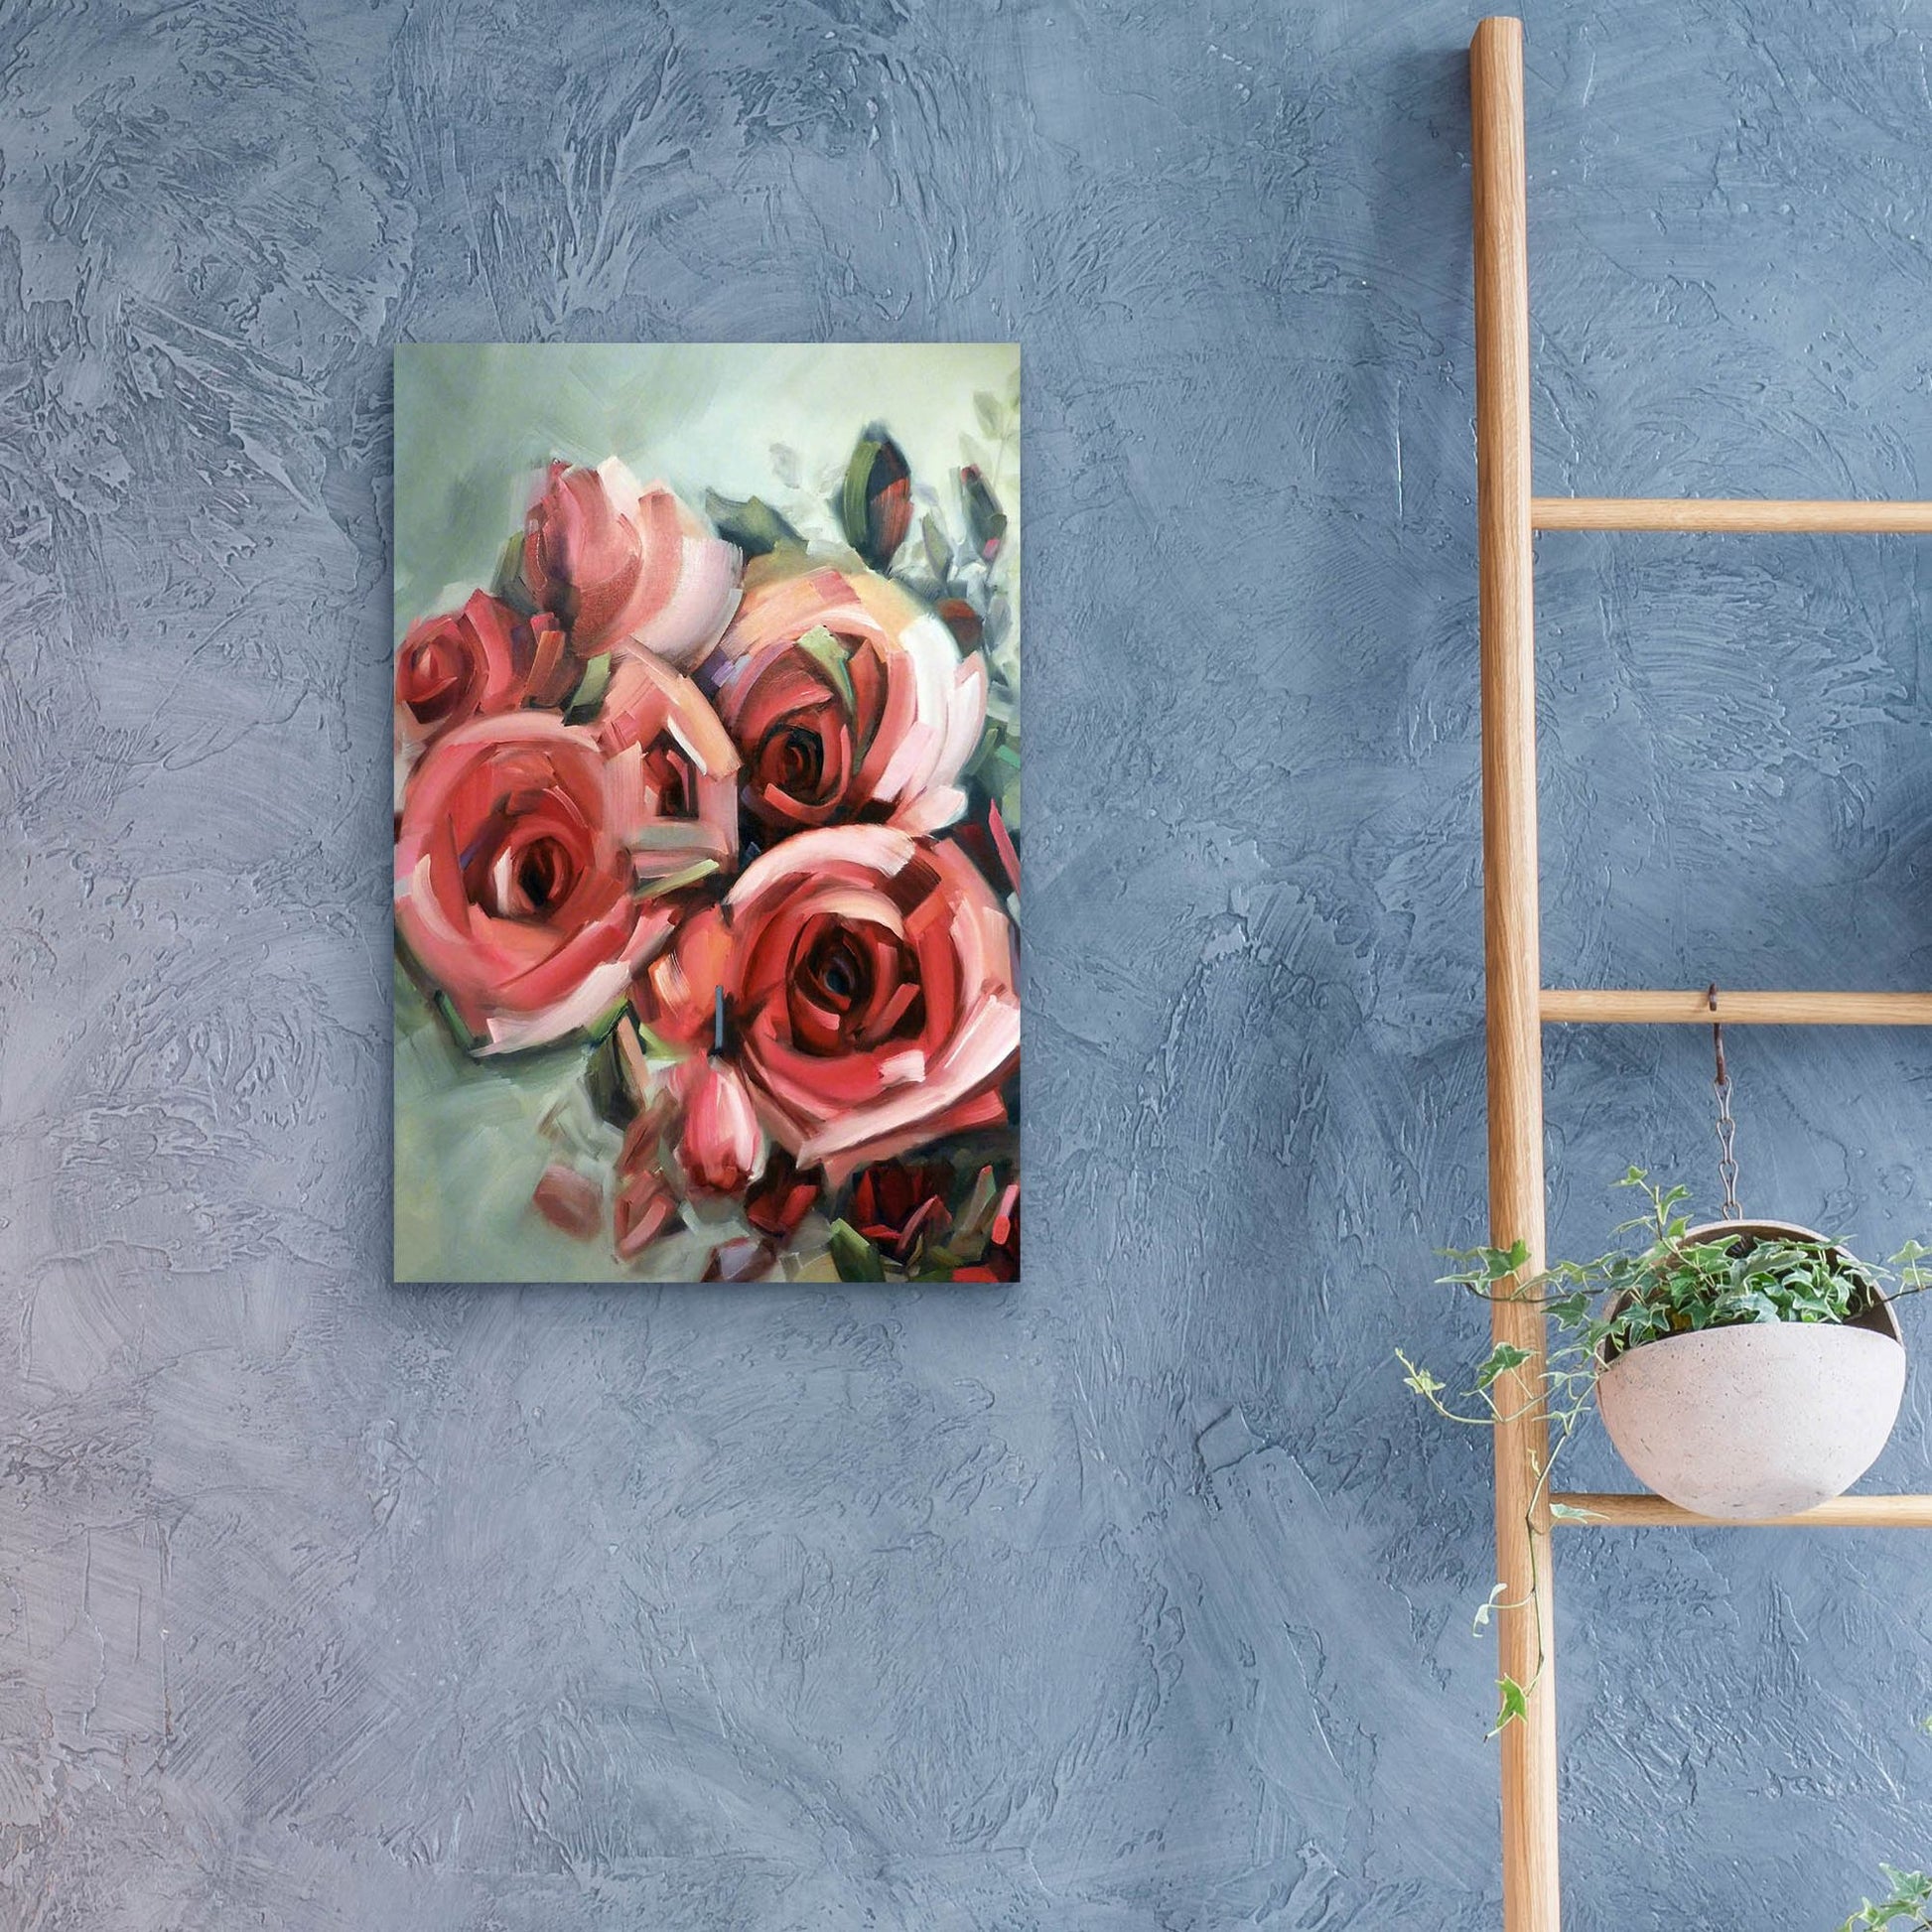 Epic Art 'Amid Scent Of Roses' by Holly Van Hart, Acrylic Glass Wall Art,16x24